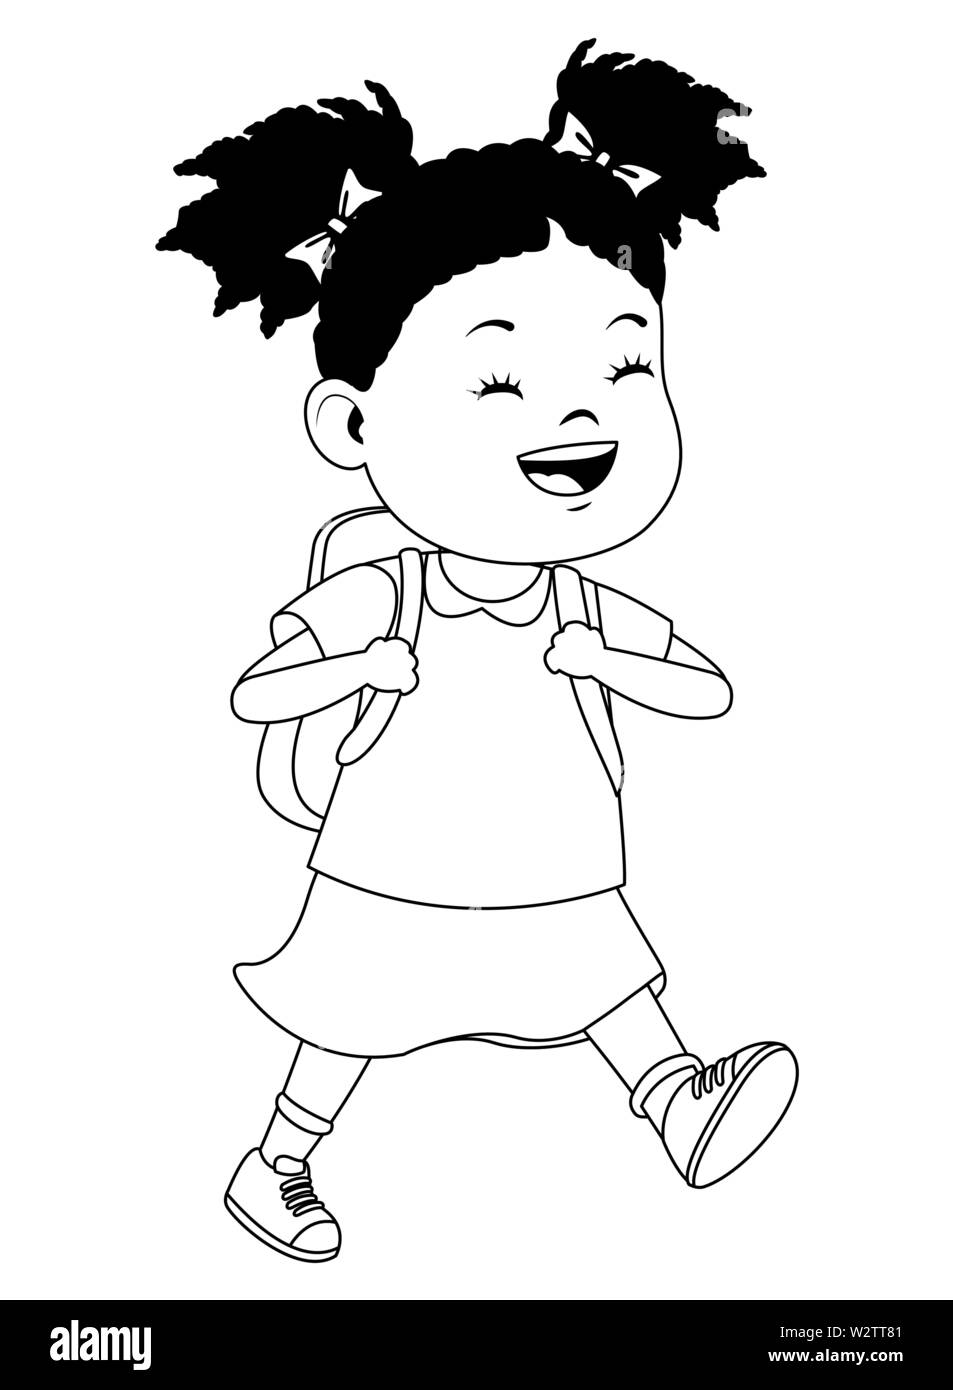 School Afro Girl With Backpack In Black And White Stock Vector Image Art Alamy